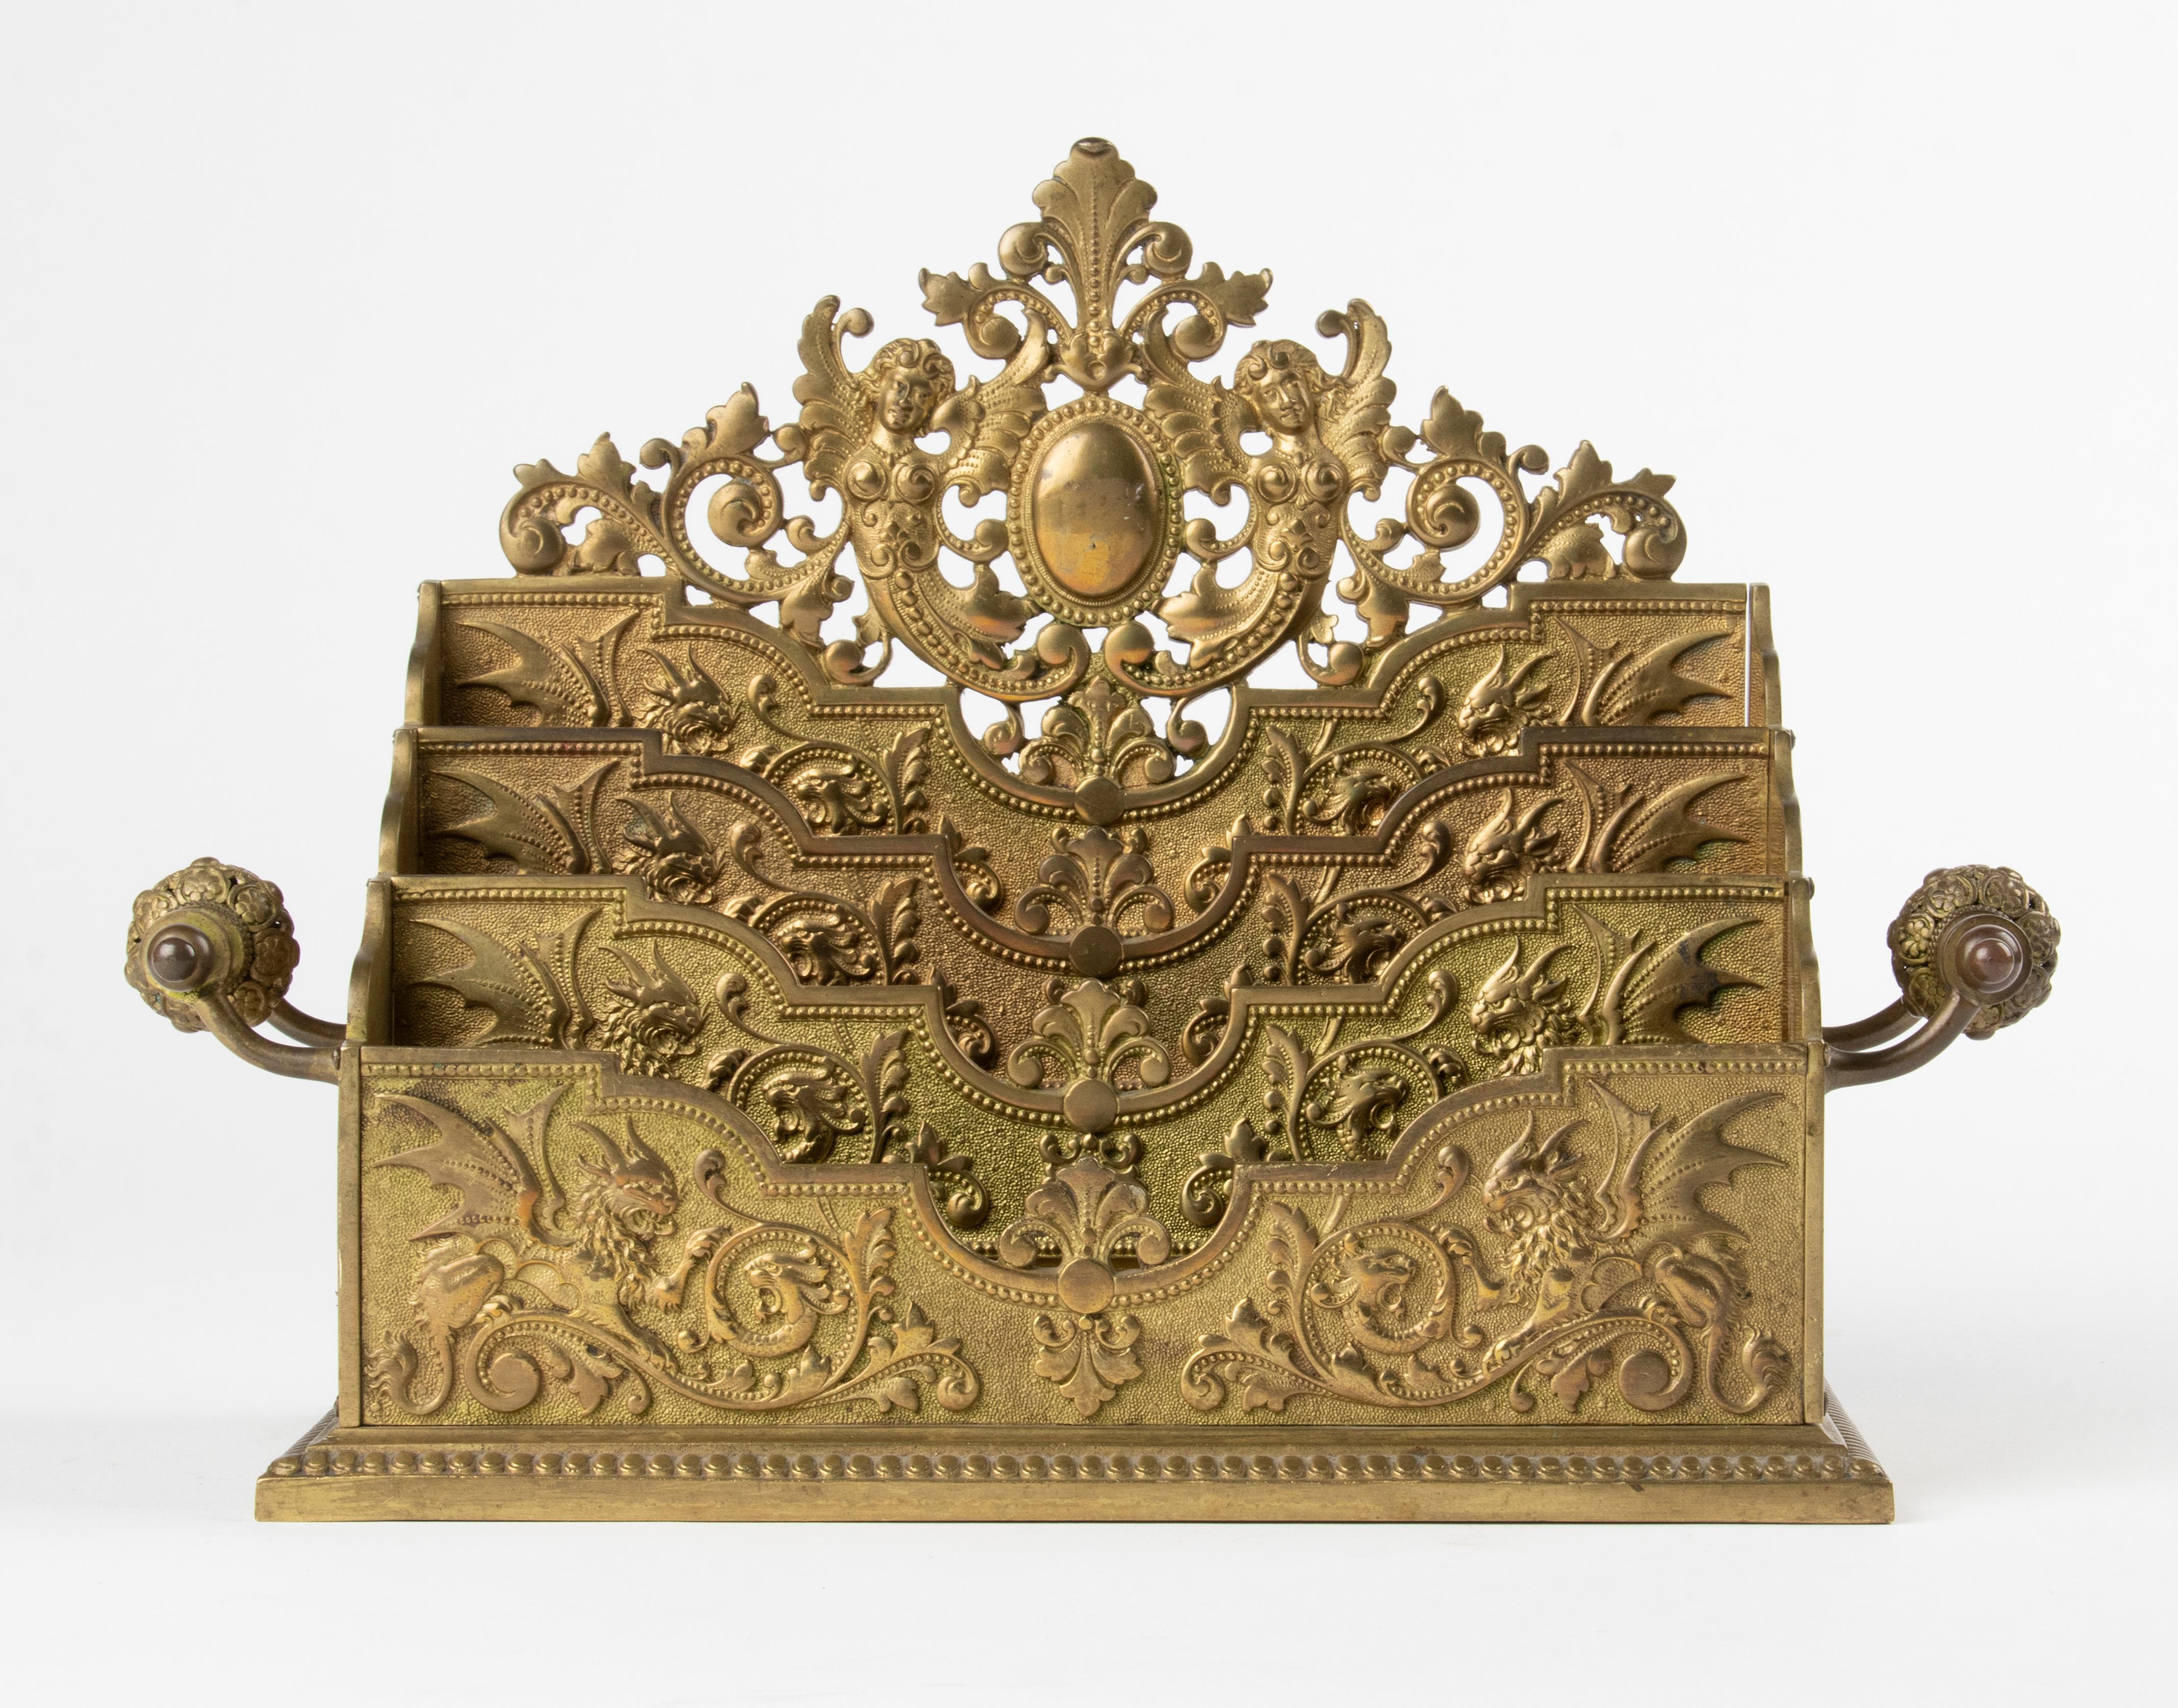 Late 19th century French bronze letter rack, richly decorated with ornaments and griffins in Renaissance style. Heavy quality bronze as well as very refined. Dating from about 1880.